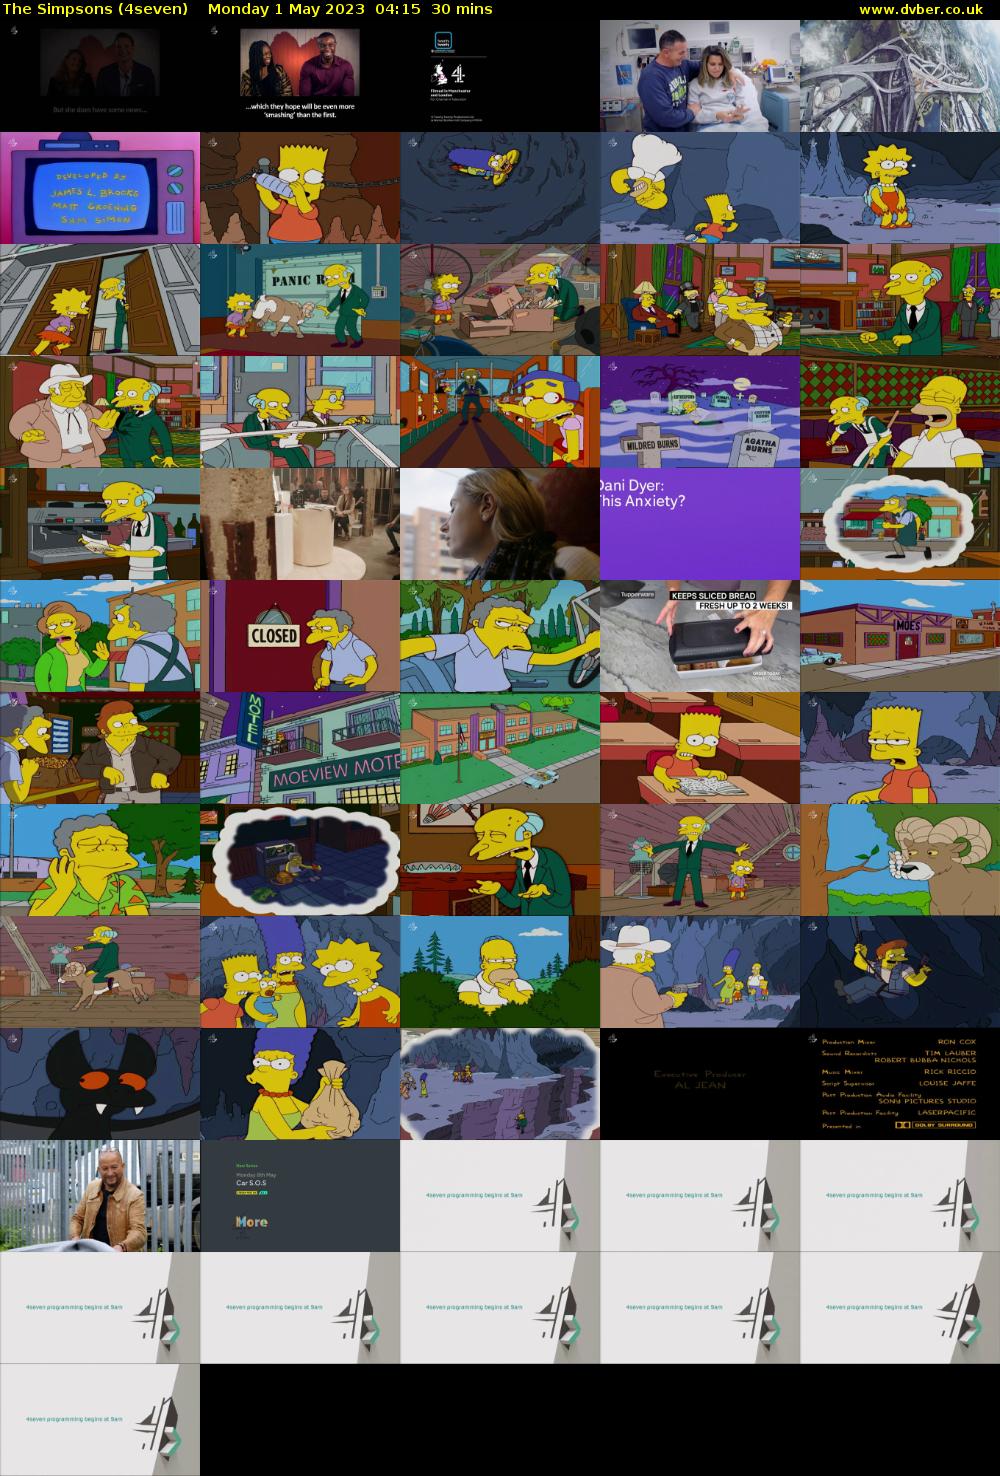 The Simpsons (4seven) Monday 1 May 2023 04:15 - 04:45